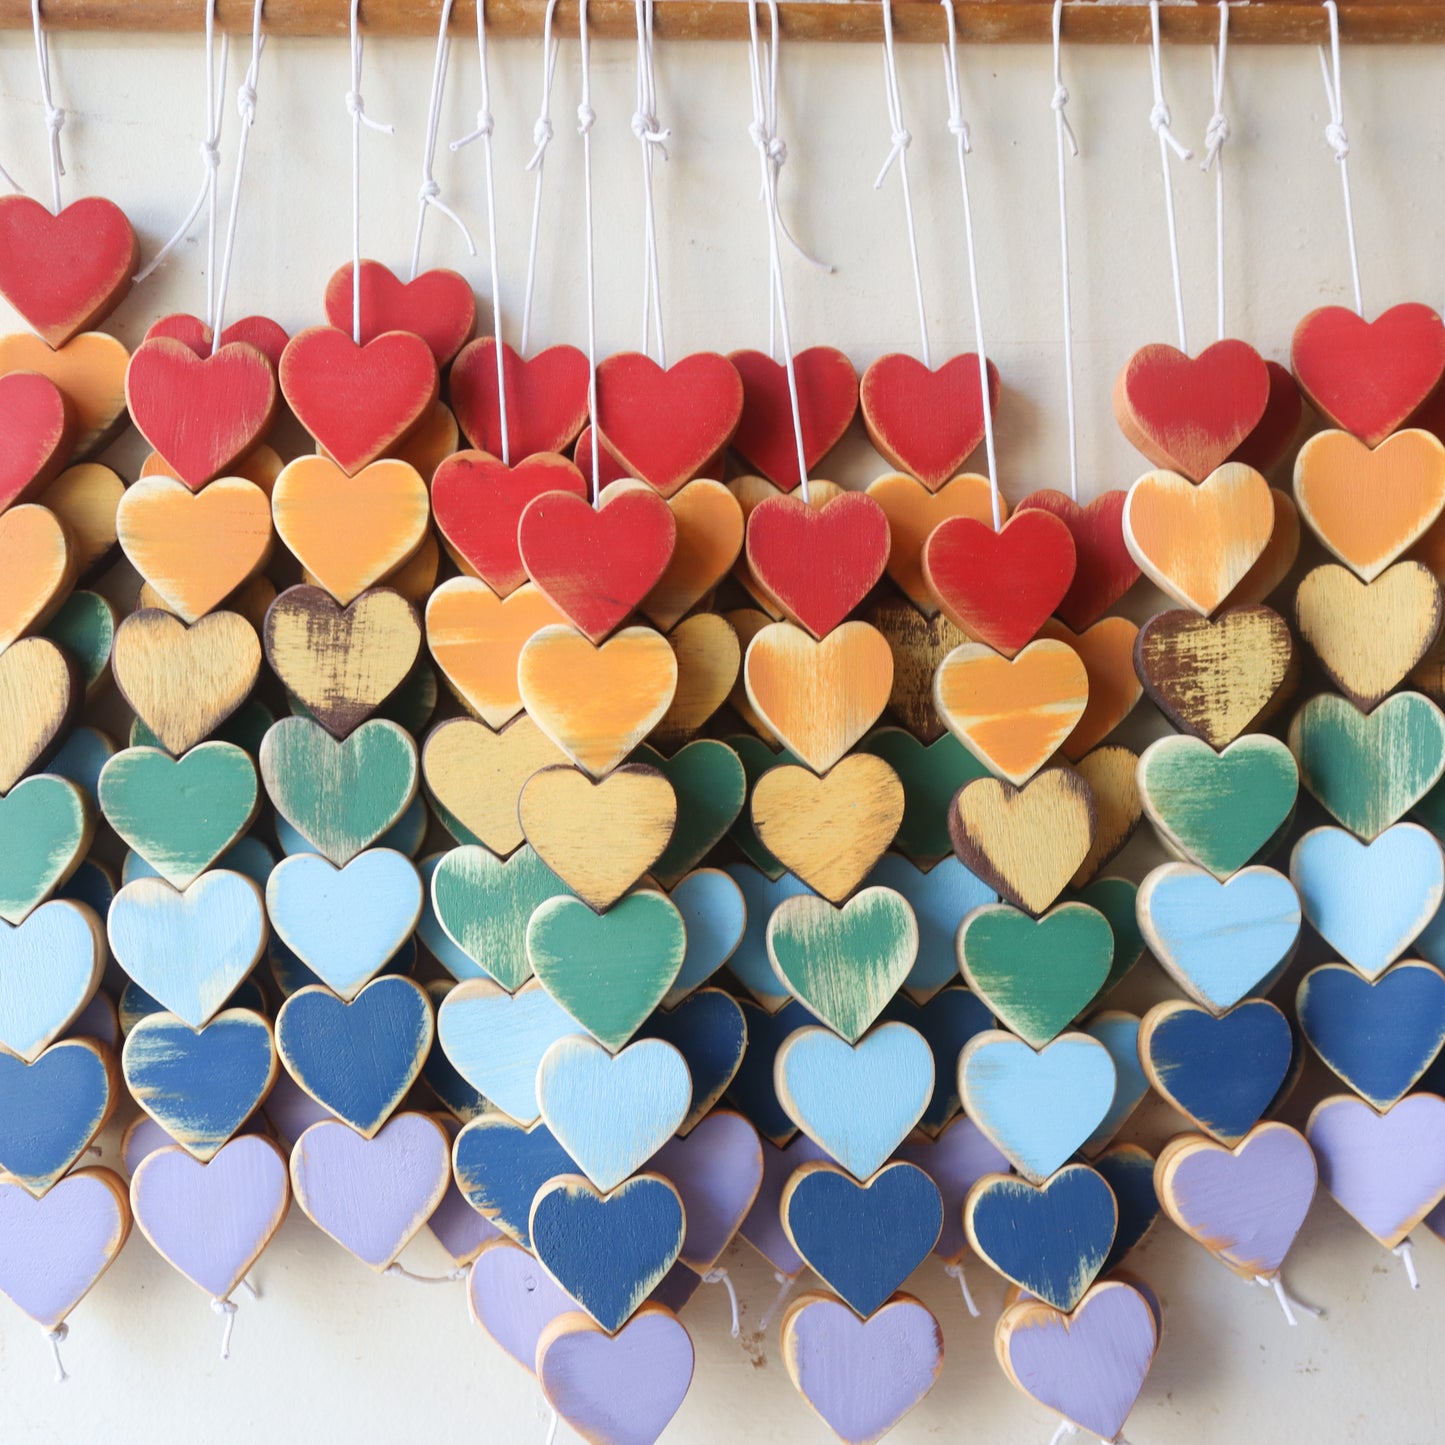 Rainbow Strings With Heart Shapes